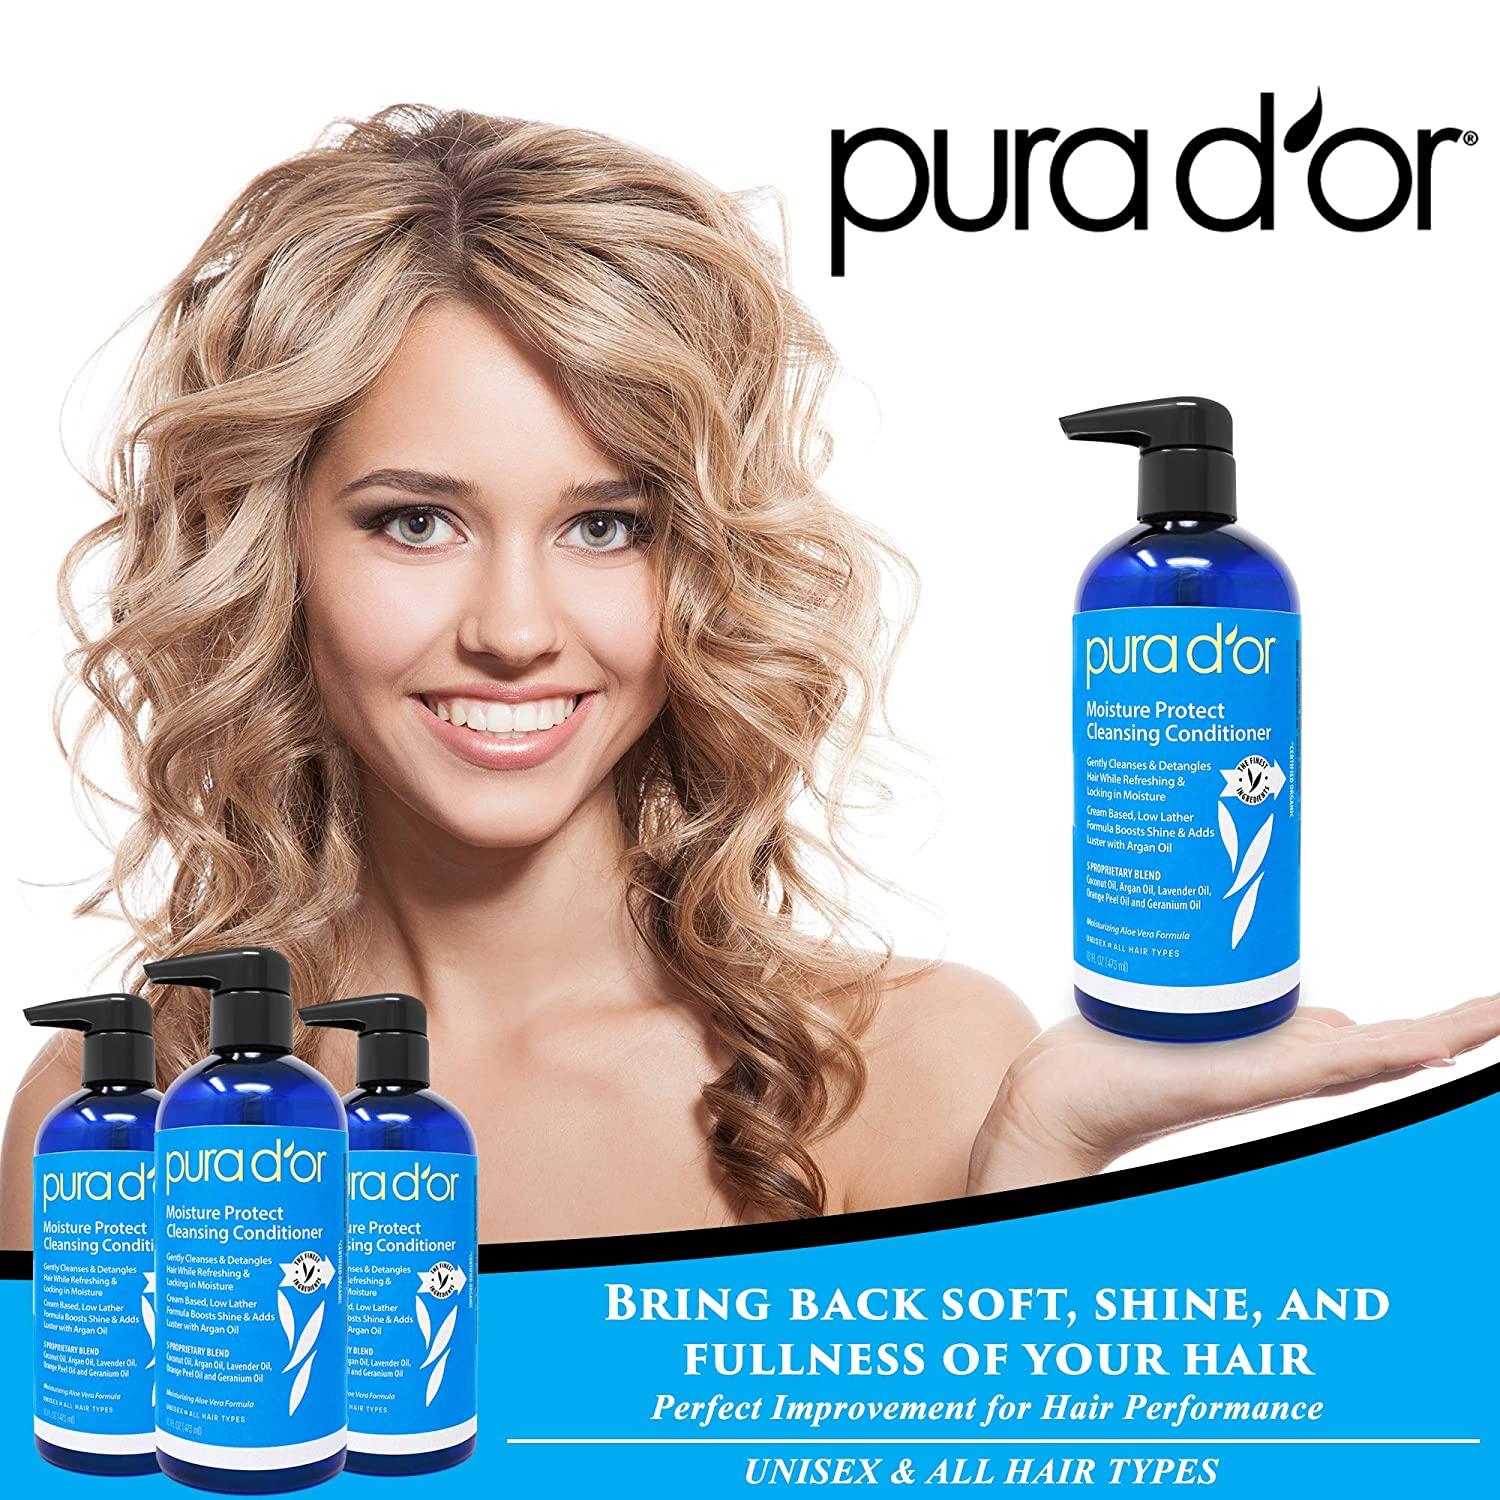 Pura D'Or Hair Loss Prevention Shampoo & Conditioner and Argan Oil